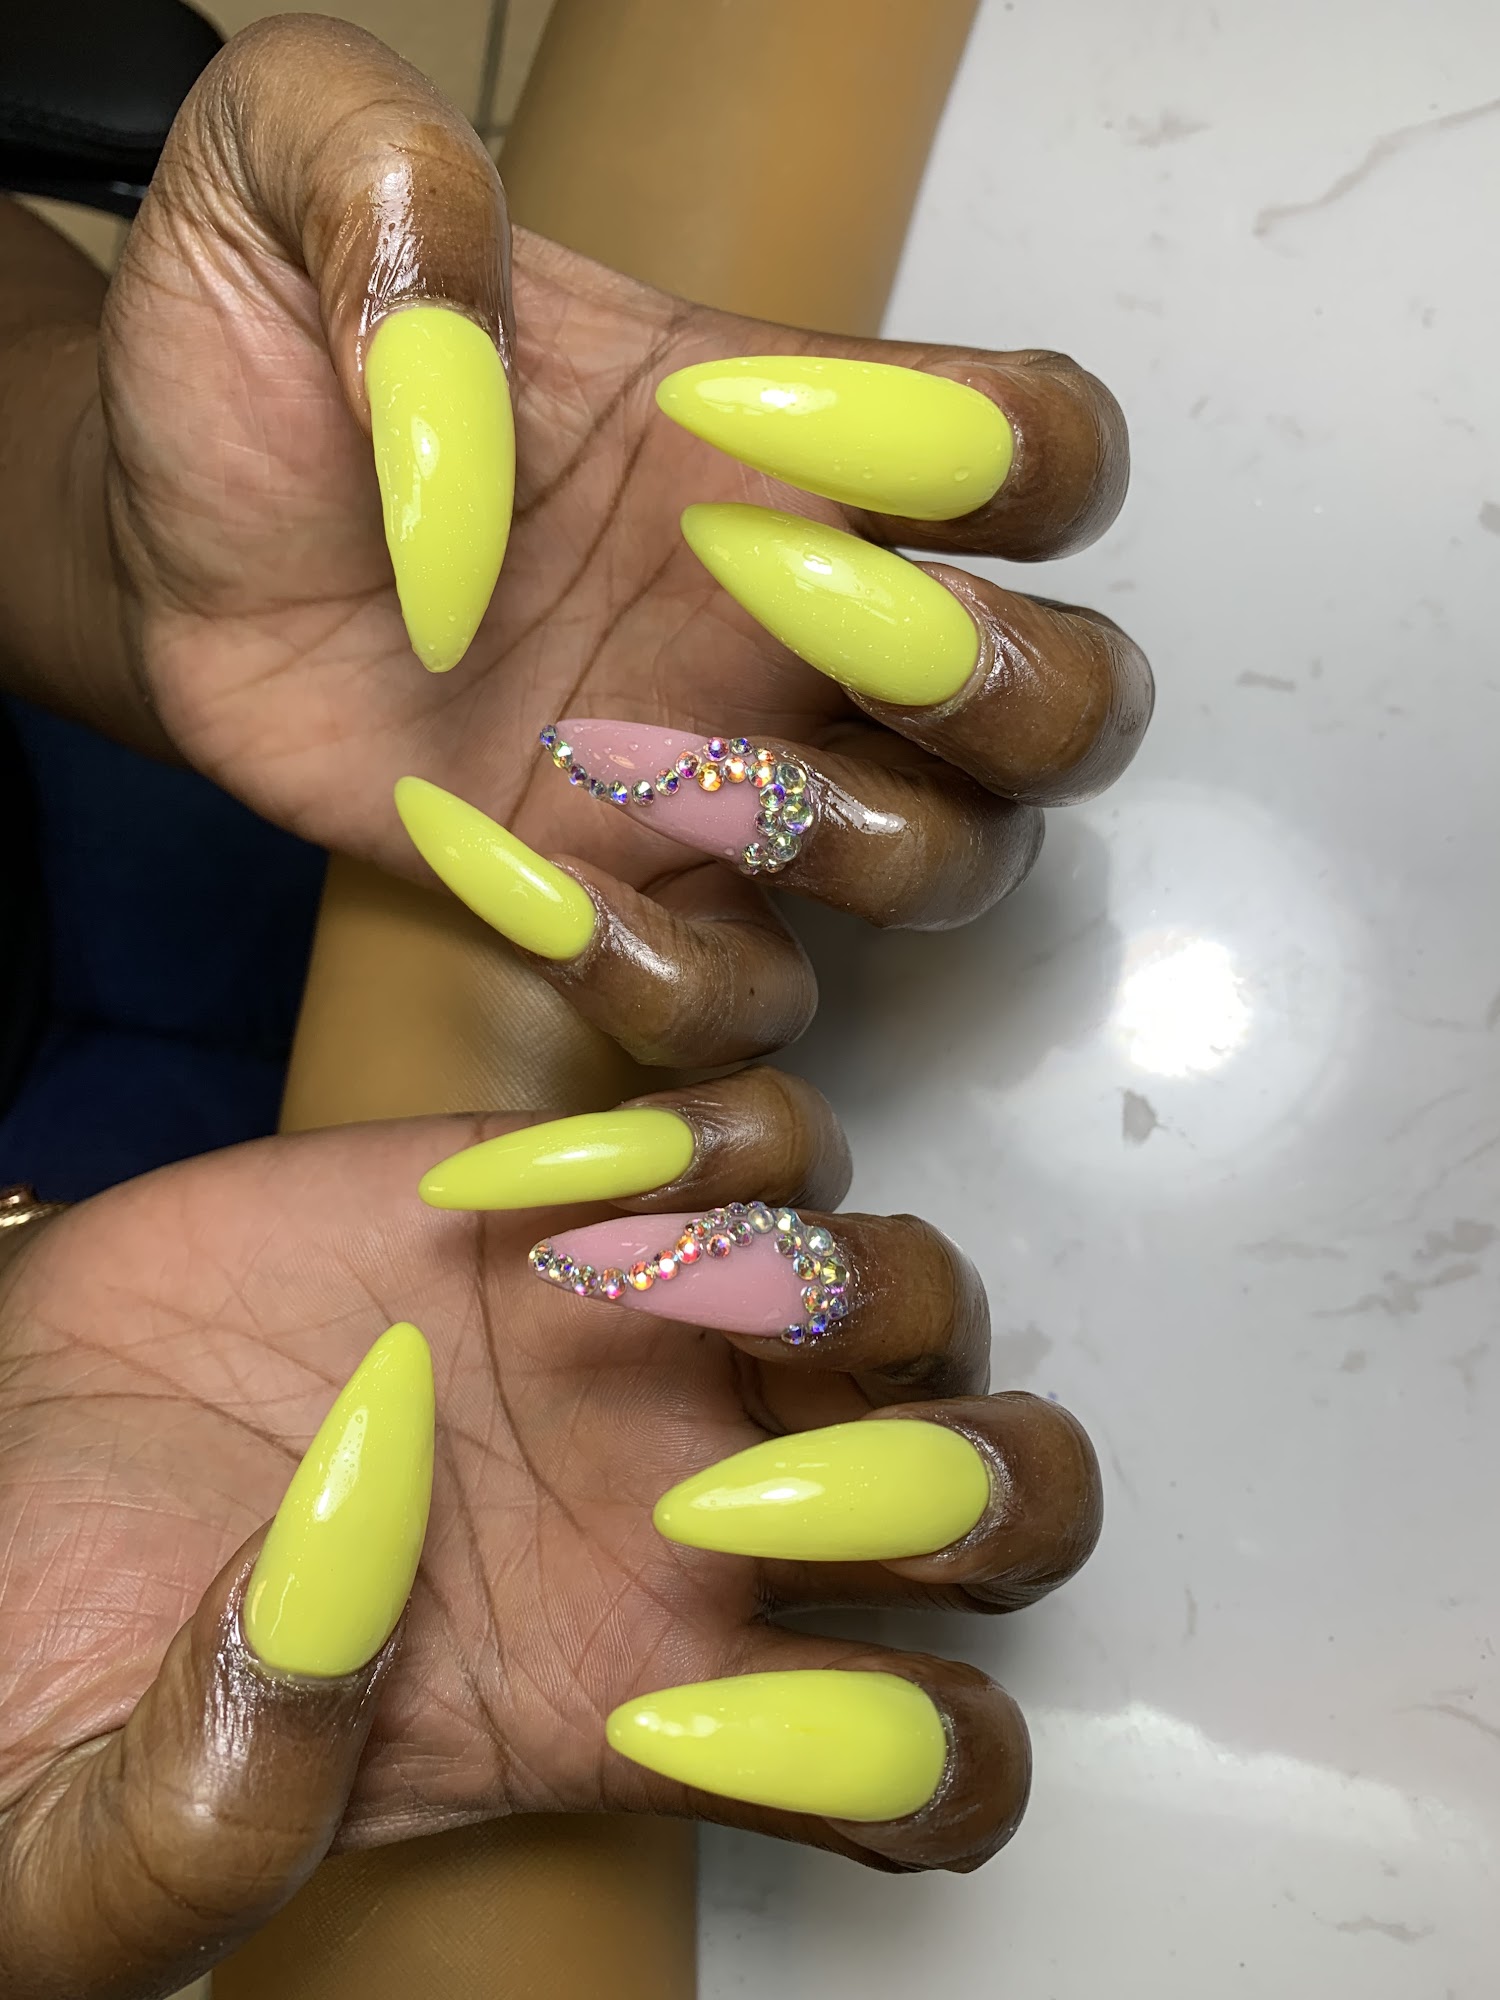 Angel Nails 2 4114 Main St, Moss Point Mississippi 39563